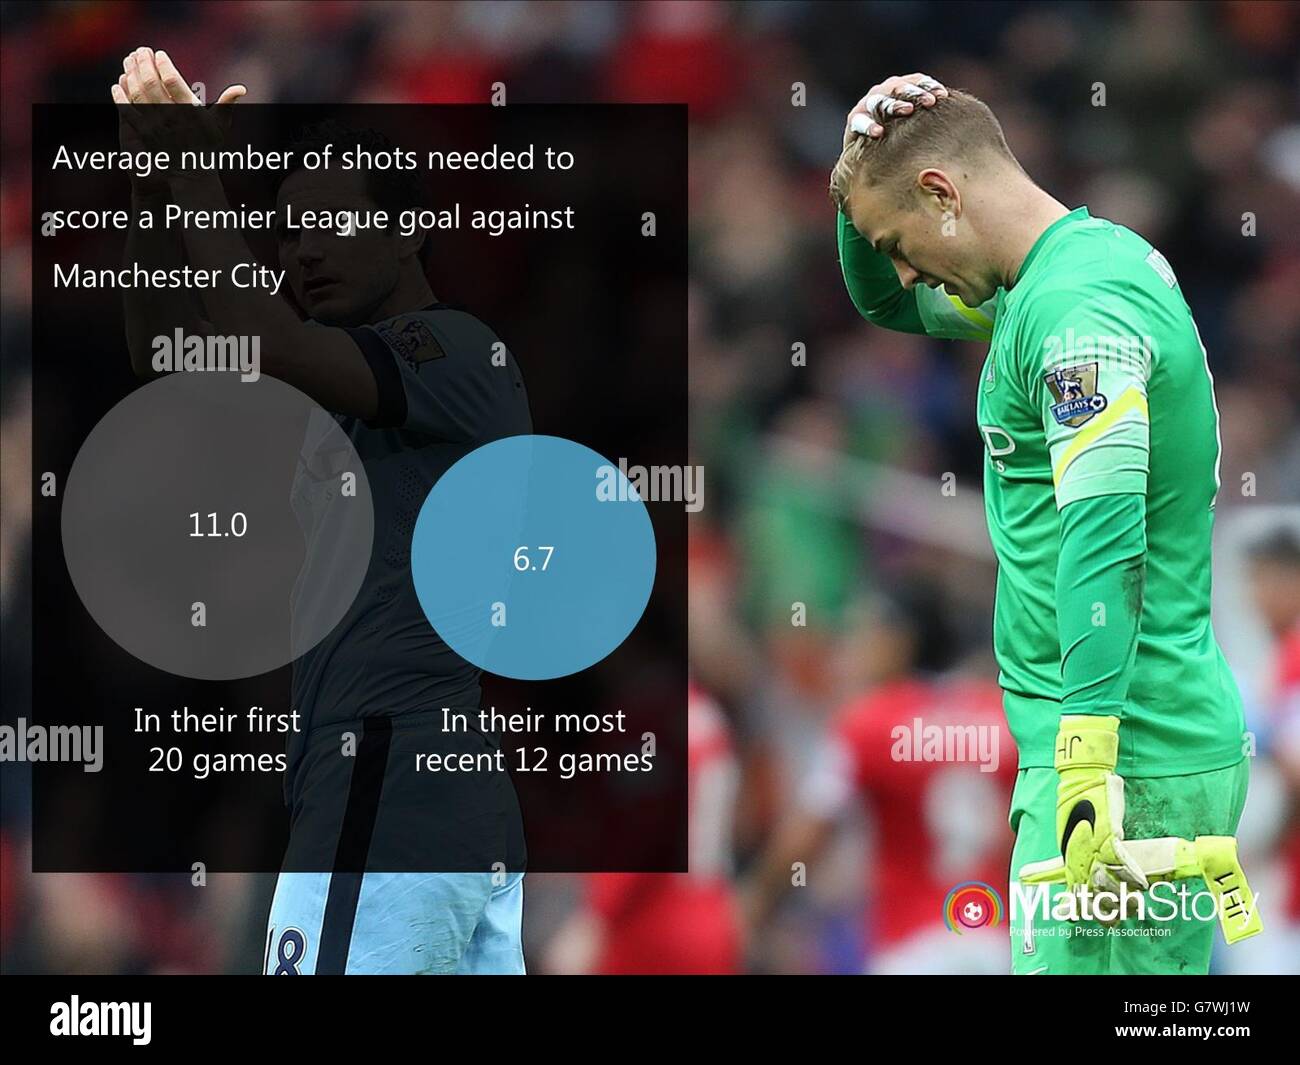 A Match Story graphic showing the average number of shots needed to score a Premier League goal against Manchester City. Stock Photo